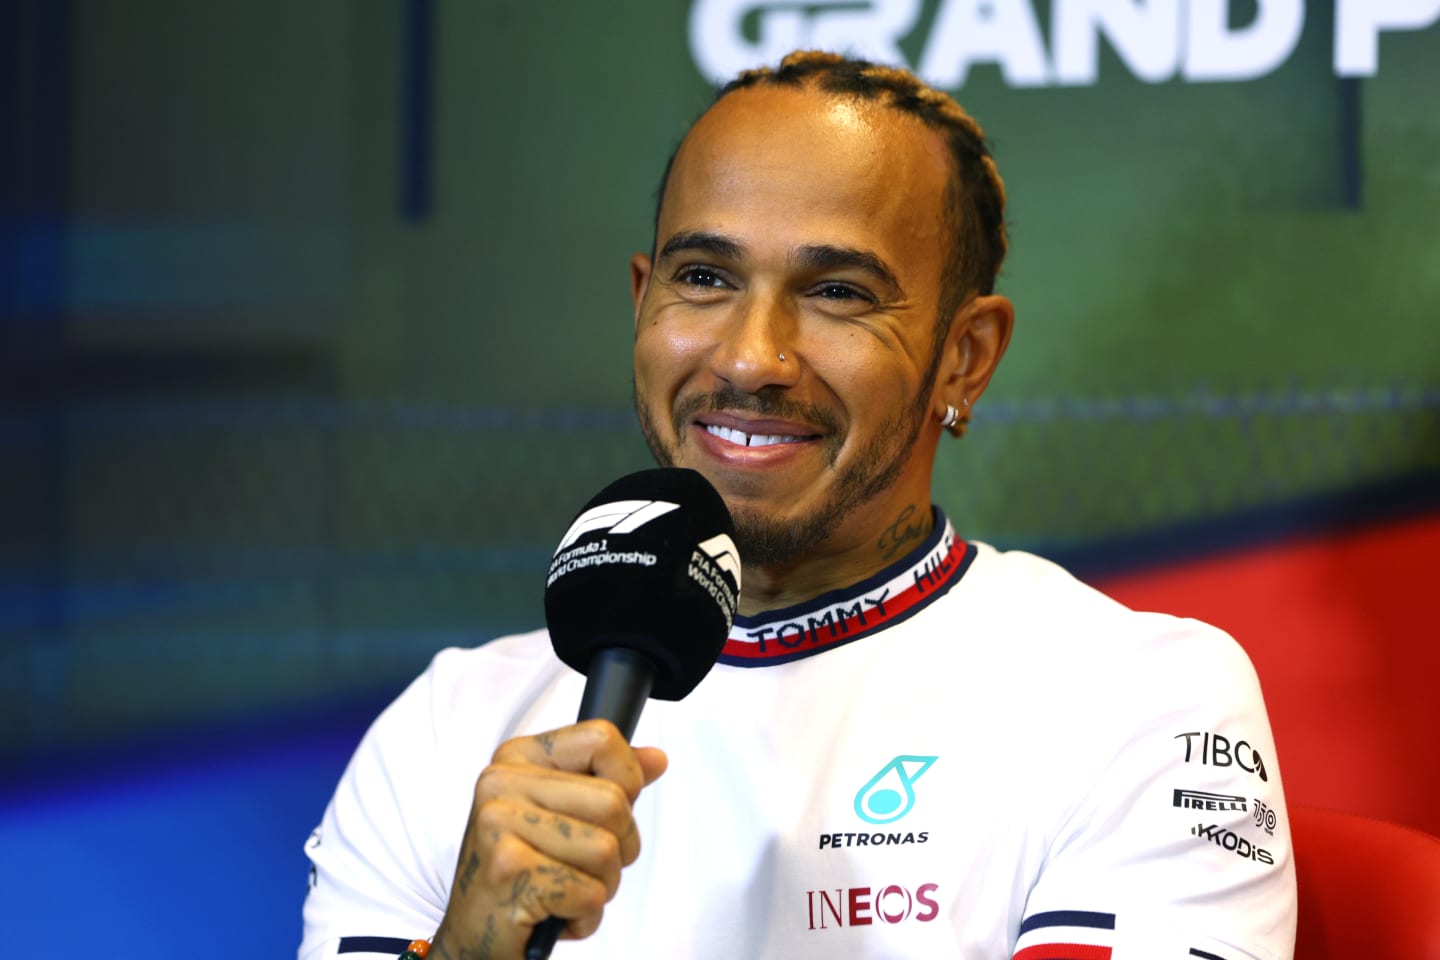 BAKU, AZERBAIJAN - JUNE 10: Lewis Hamilton of Great Britain and Mercedes talks in the Drivers Press Conference prior to practice ahead of the F1 Grand Prix of Azerbaijan at Baku City Circuit on June 10, 2022 in Baku, Azerbaijan. (Photo by Clive Rose/Getty Images)